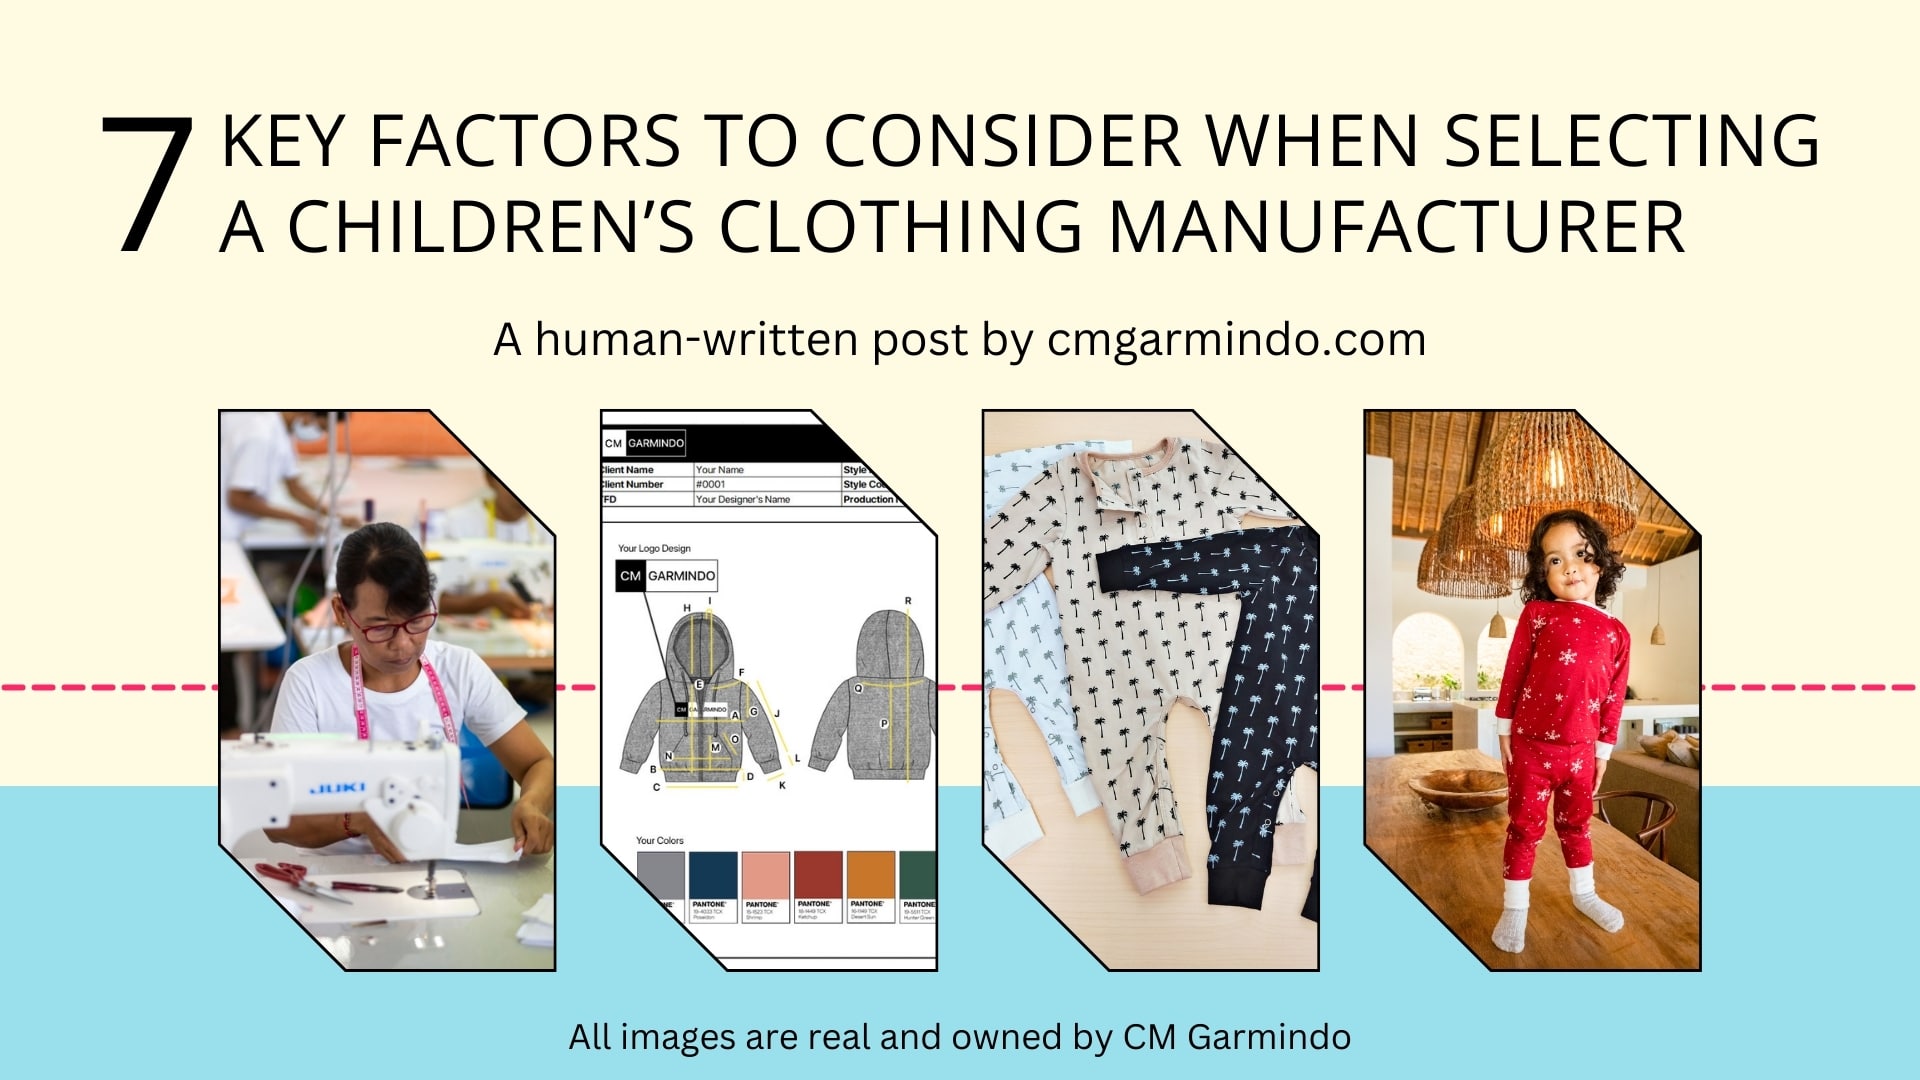 Main image for the article titled 7 Key Factors to Consider When Selecting a Children’s Clothing Manufacturer.